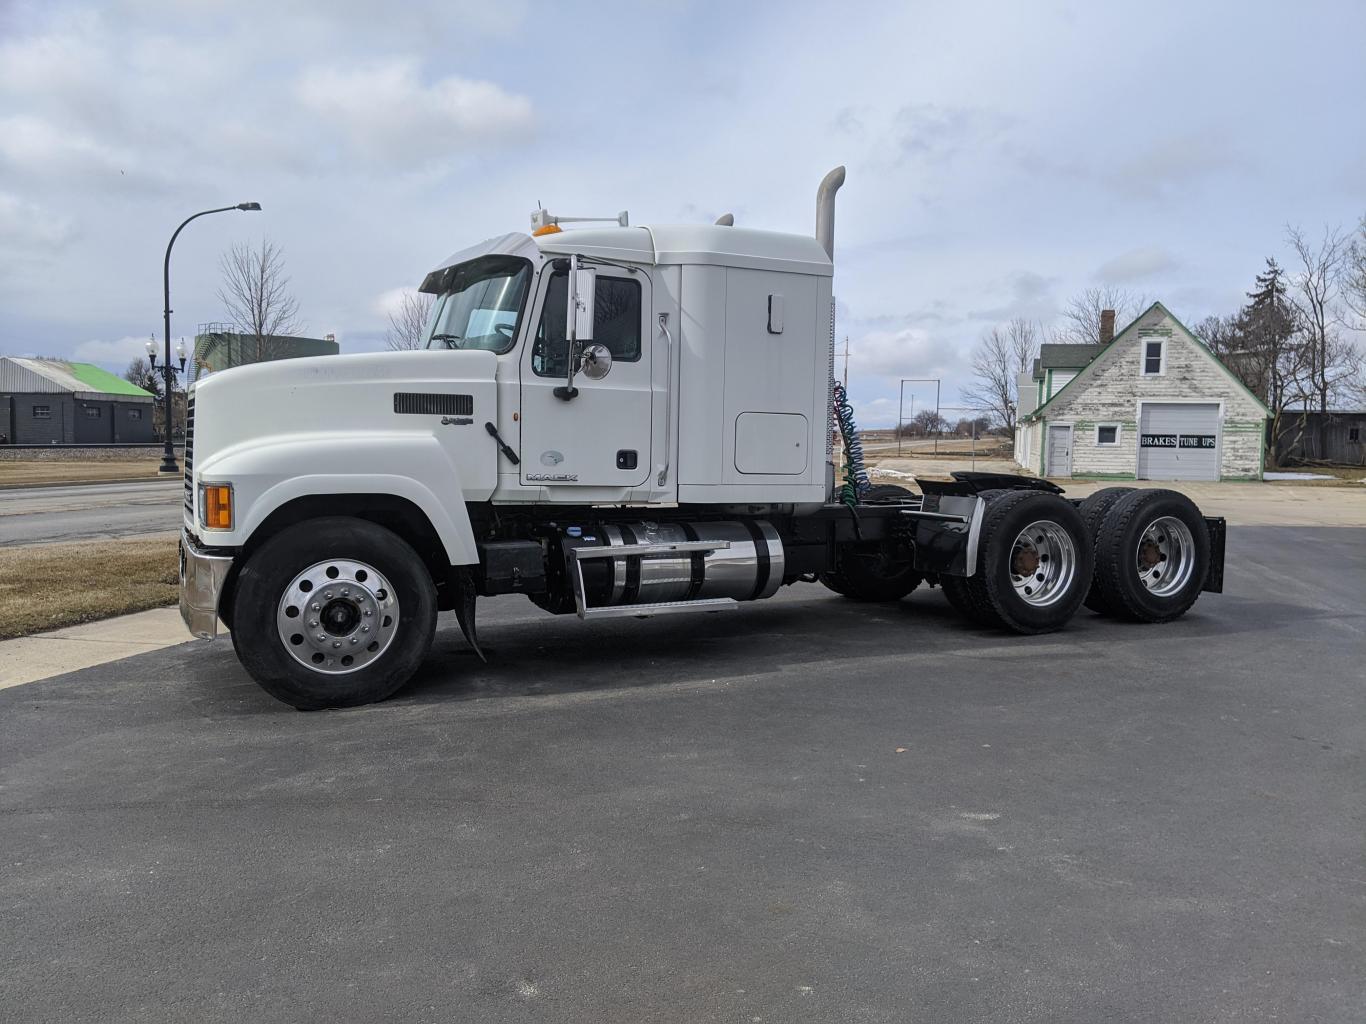 Driver side View - 2014 Mack CHU613
418k miles
Inquire online or call 815-264-3581